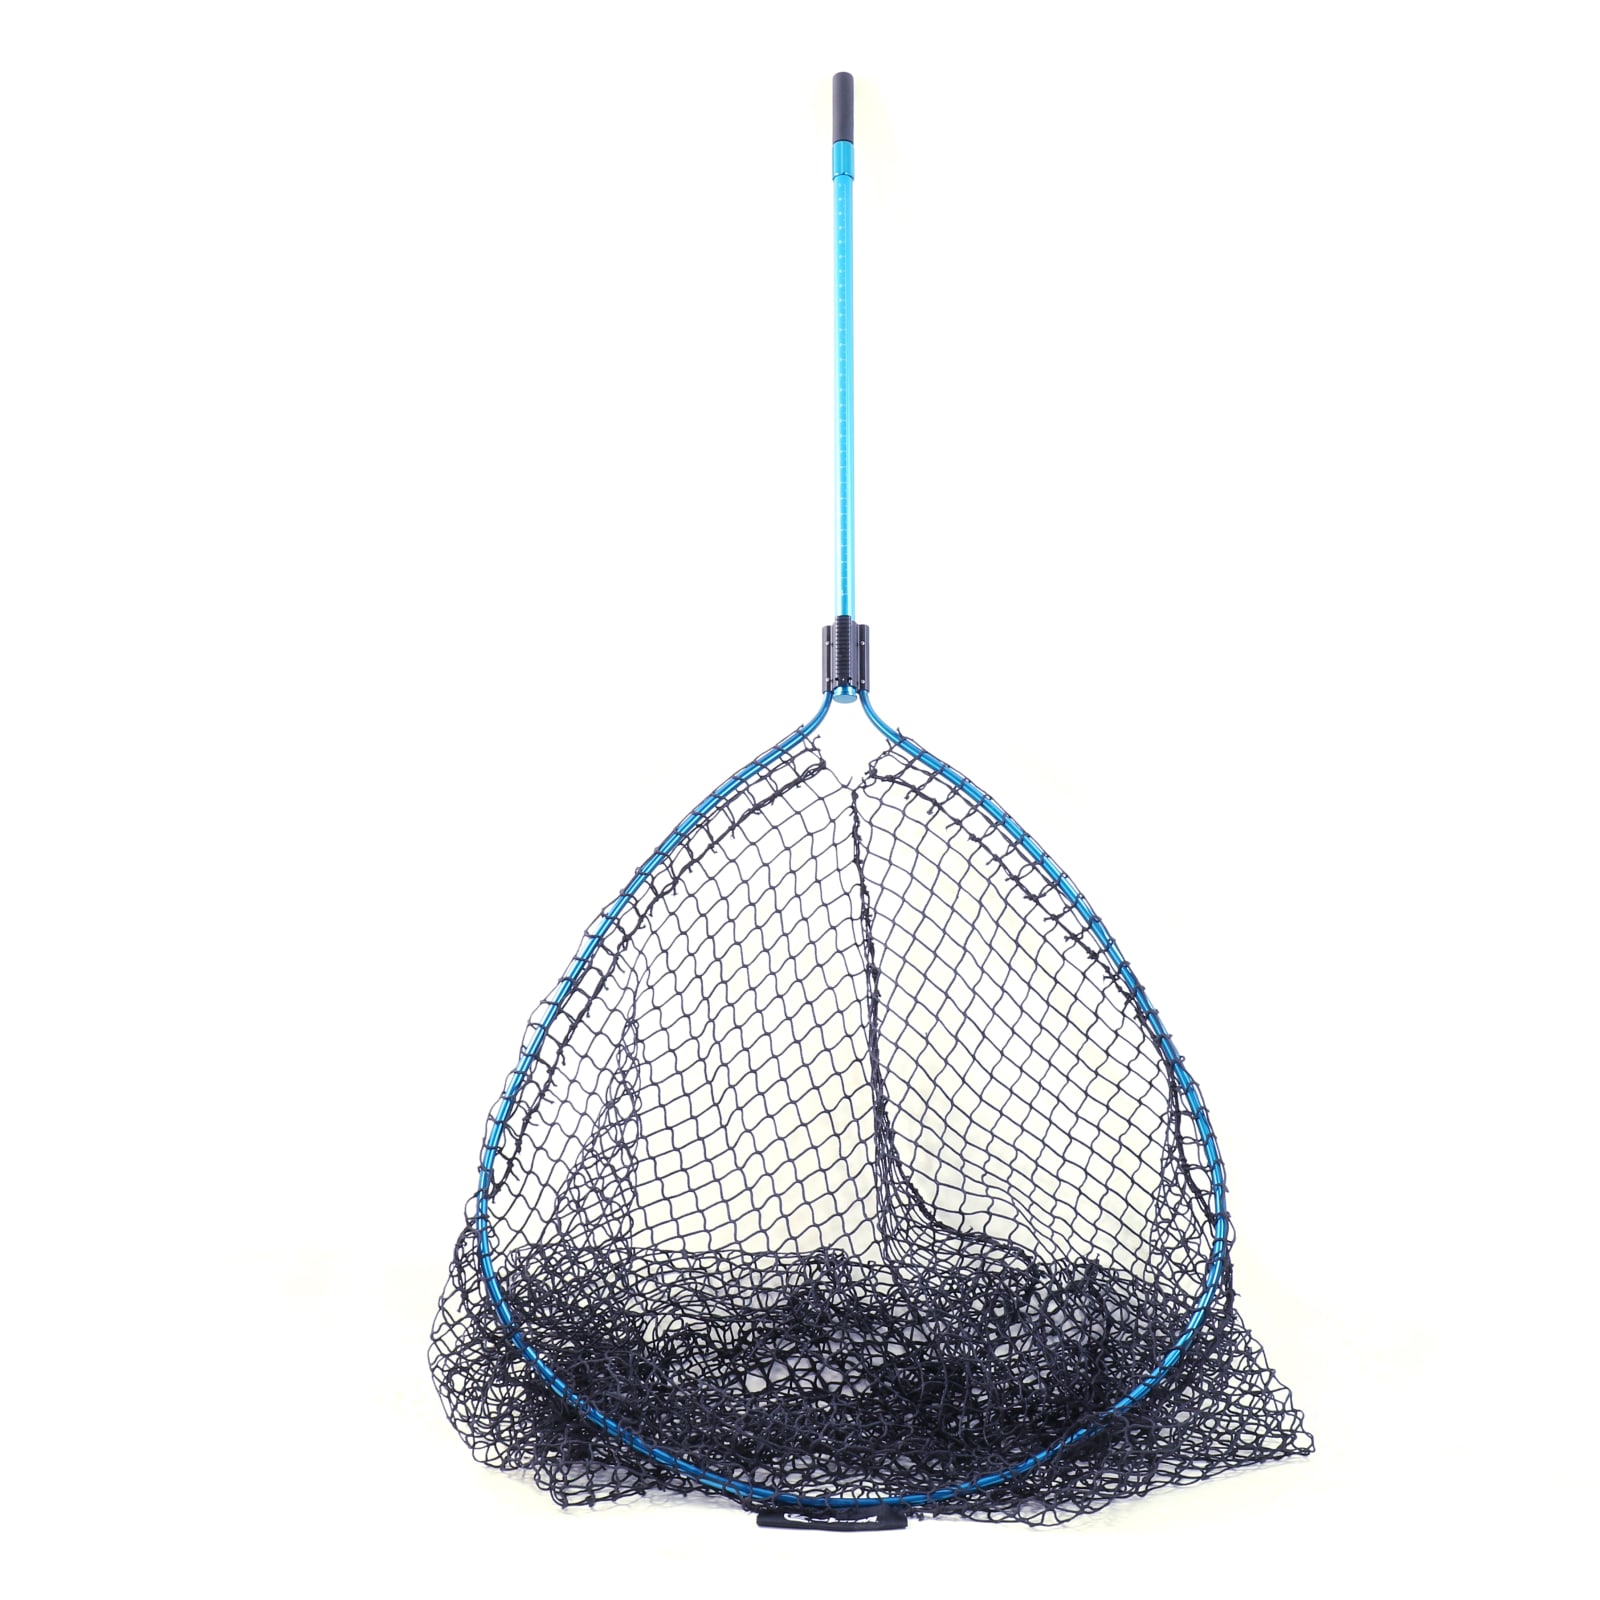 BigTooth Colossus Teardrop 32 in. x 32 in. Musky Net by Clam at